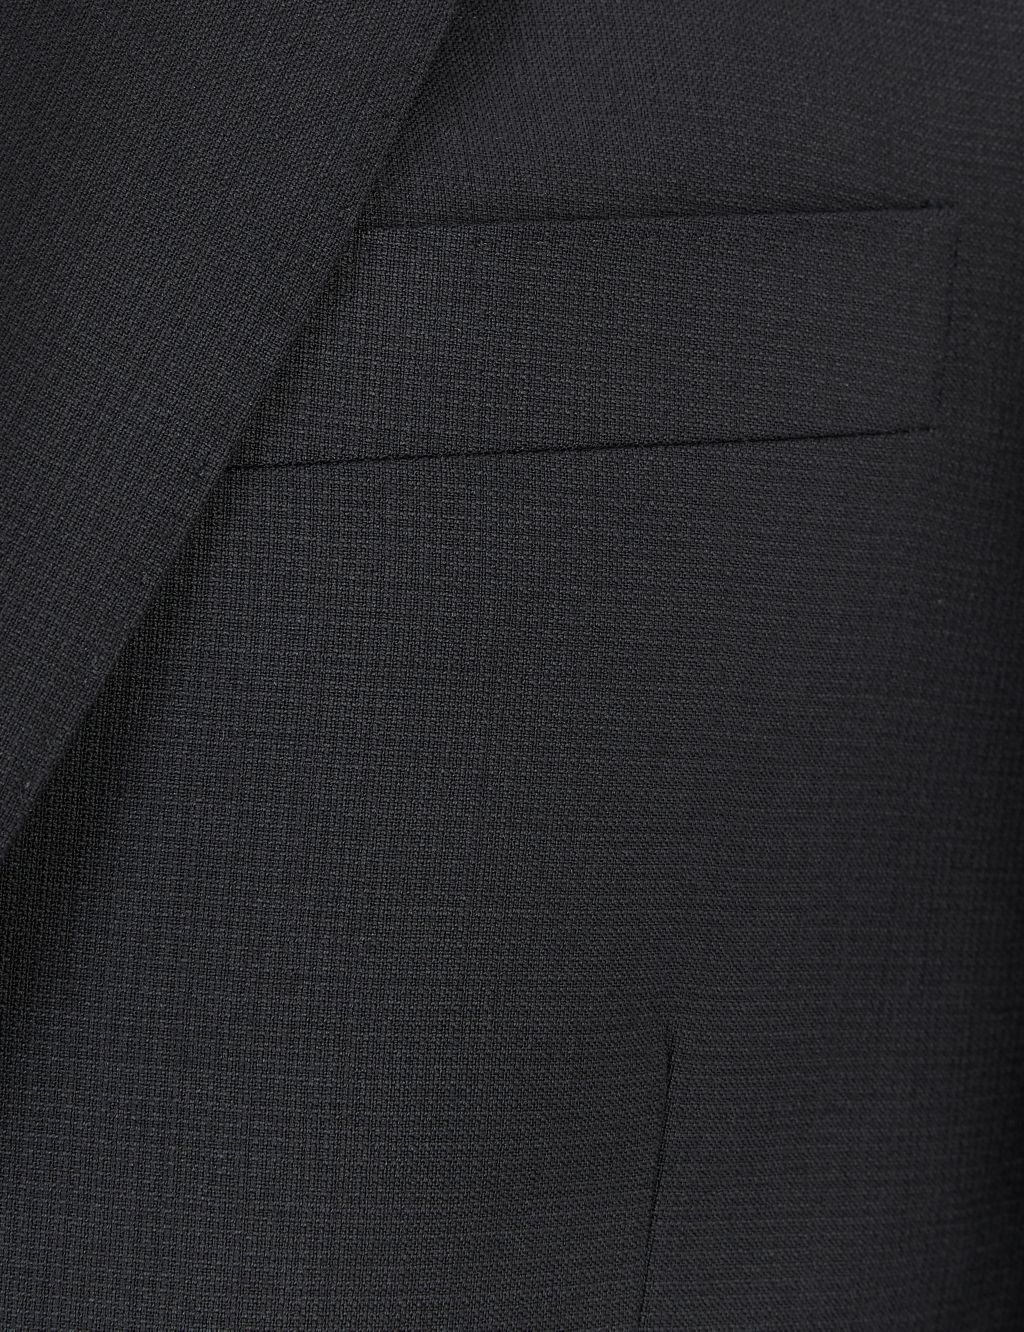 Navy Tailored Fit Wool Jacket | Savile Row Inspired | M&S